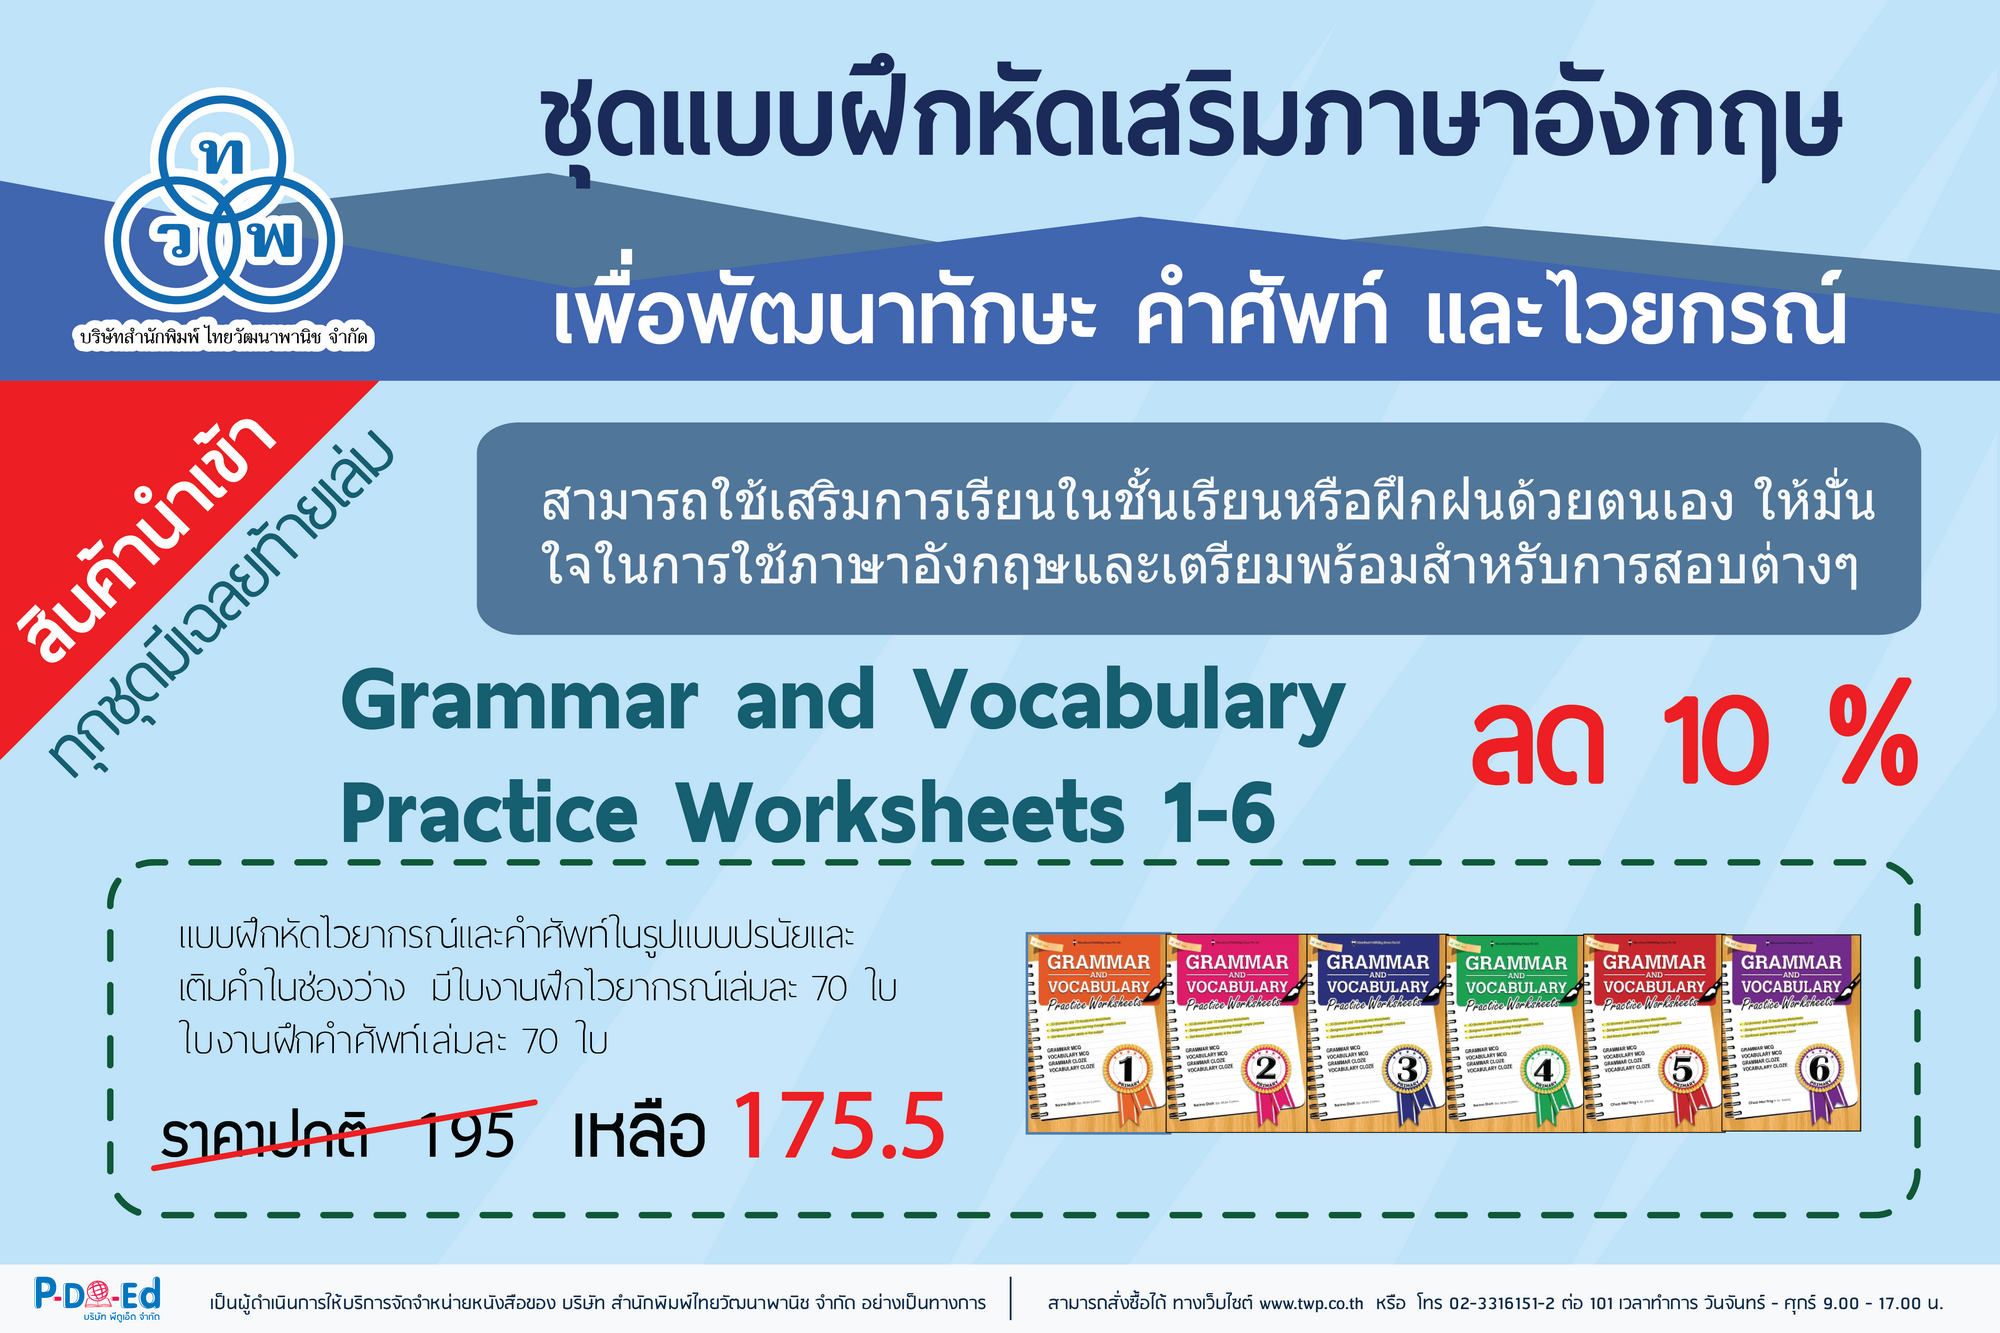 Grammar and Vocabulary Practice Worksheets 1-6